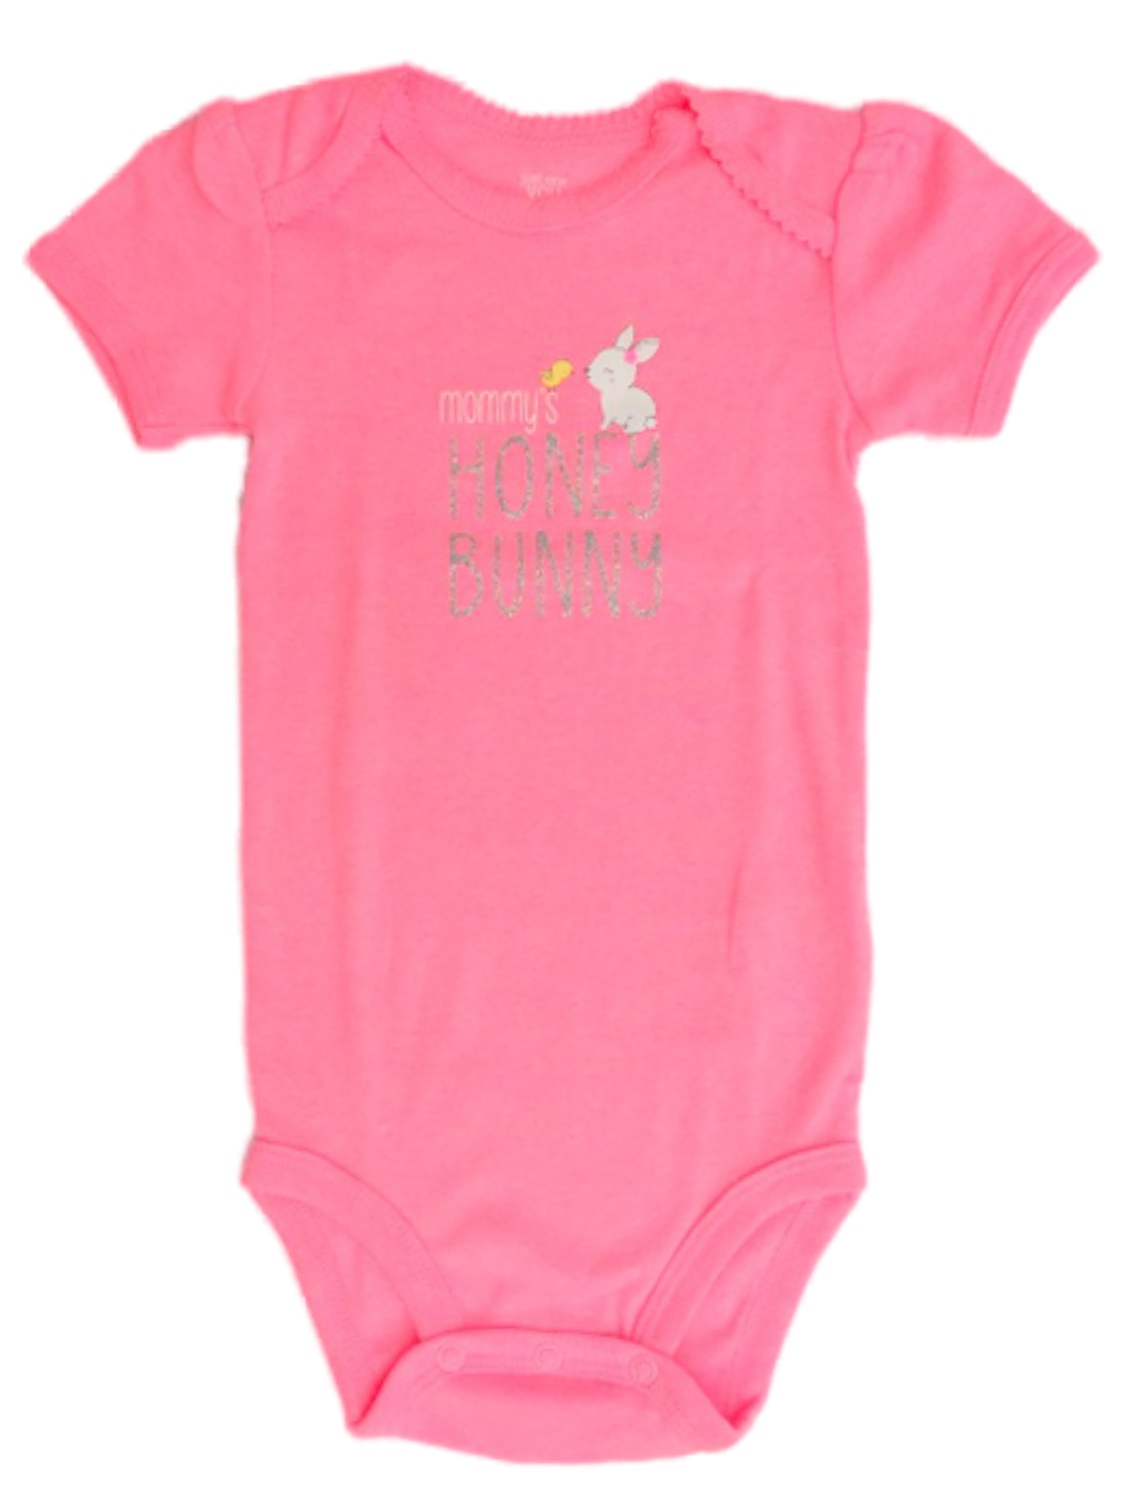 Carter's Infant Girls Pink Mommy's Honey Bunny Easter Outfit Baby Rabbit Bodysuit